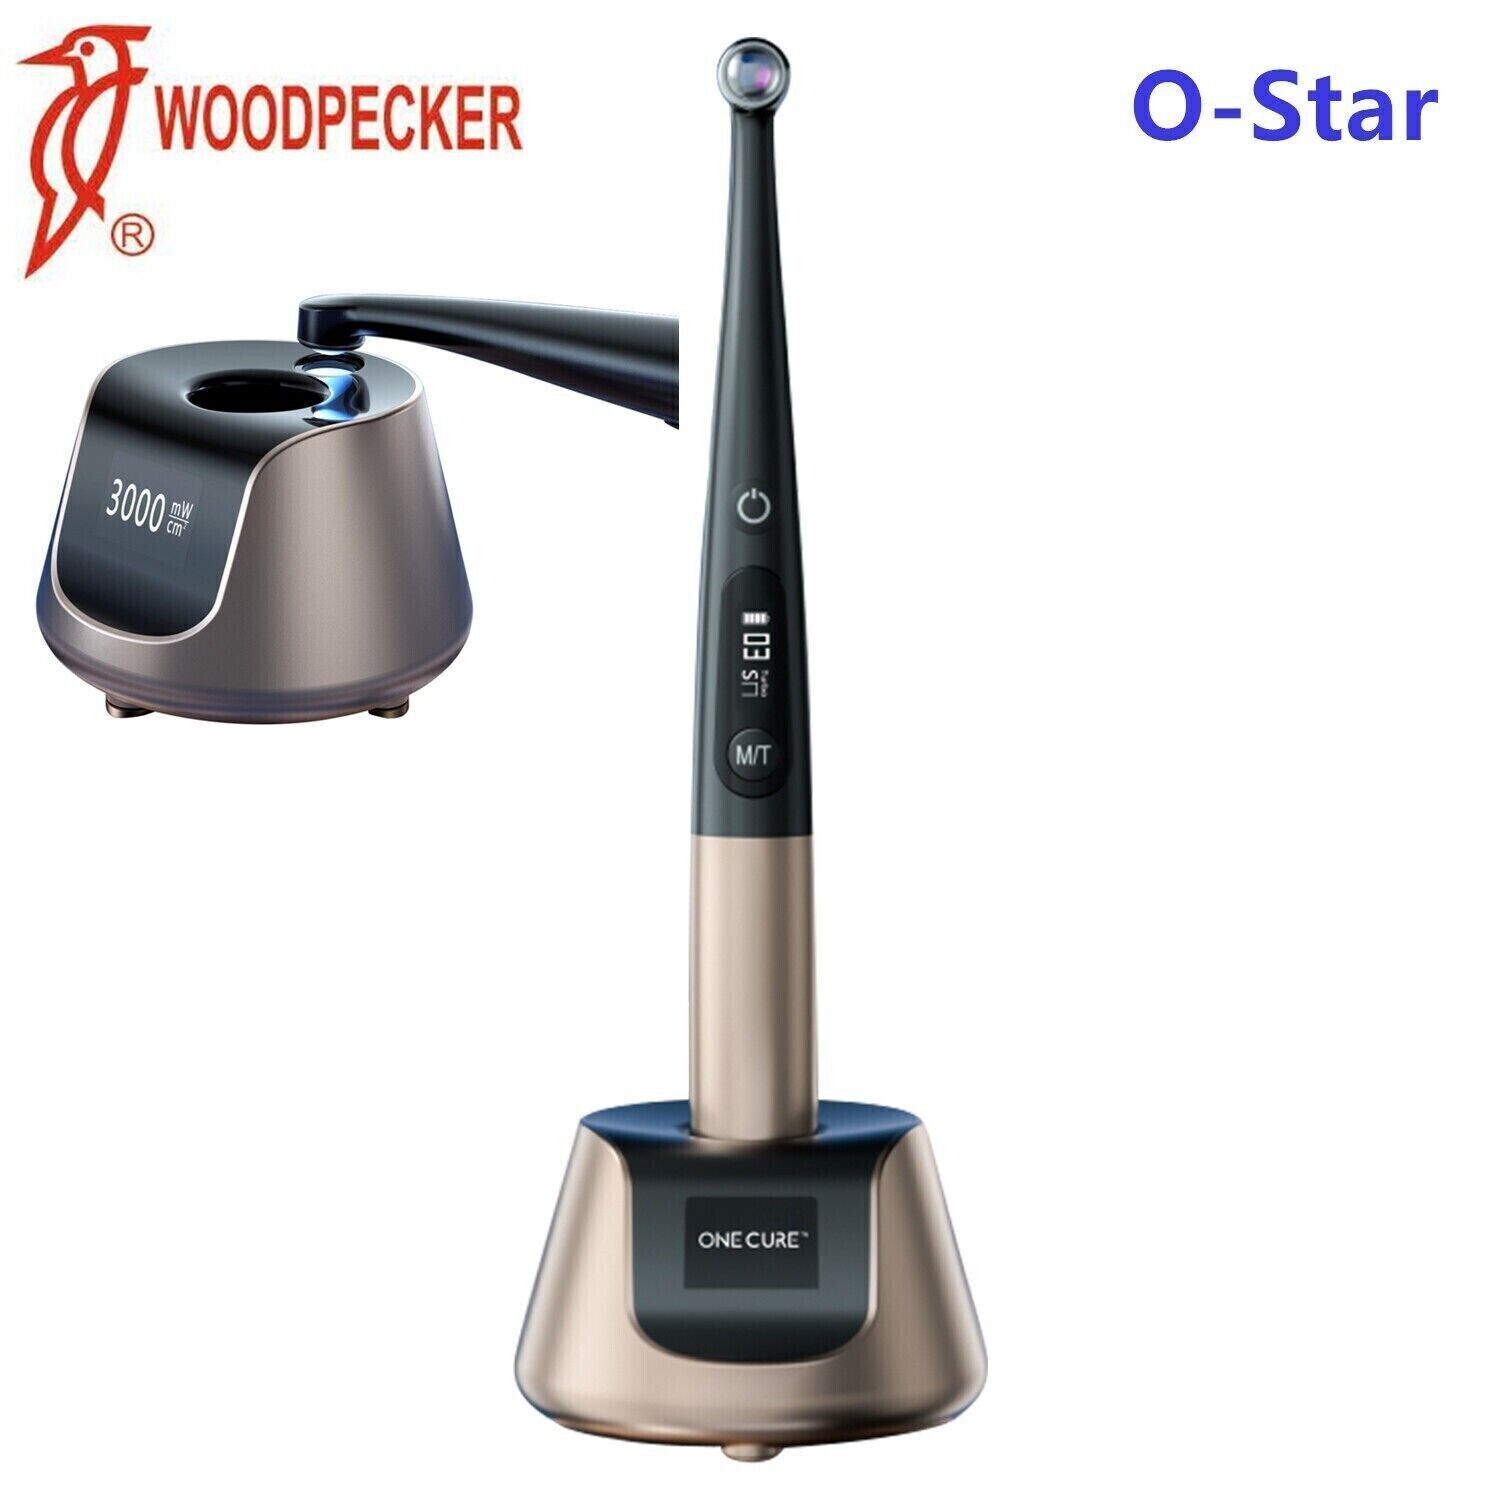 WOODPECKER #O-STAR High-intensity LED cordless curing light unit